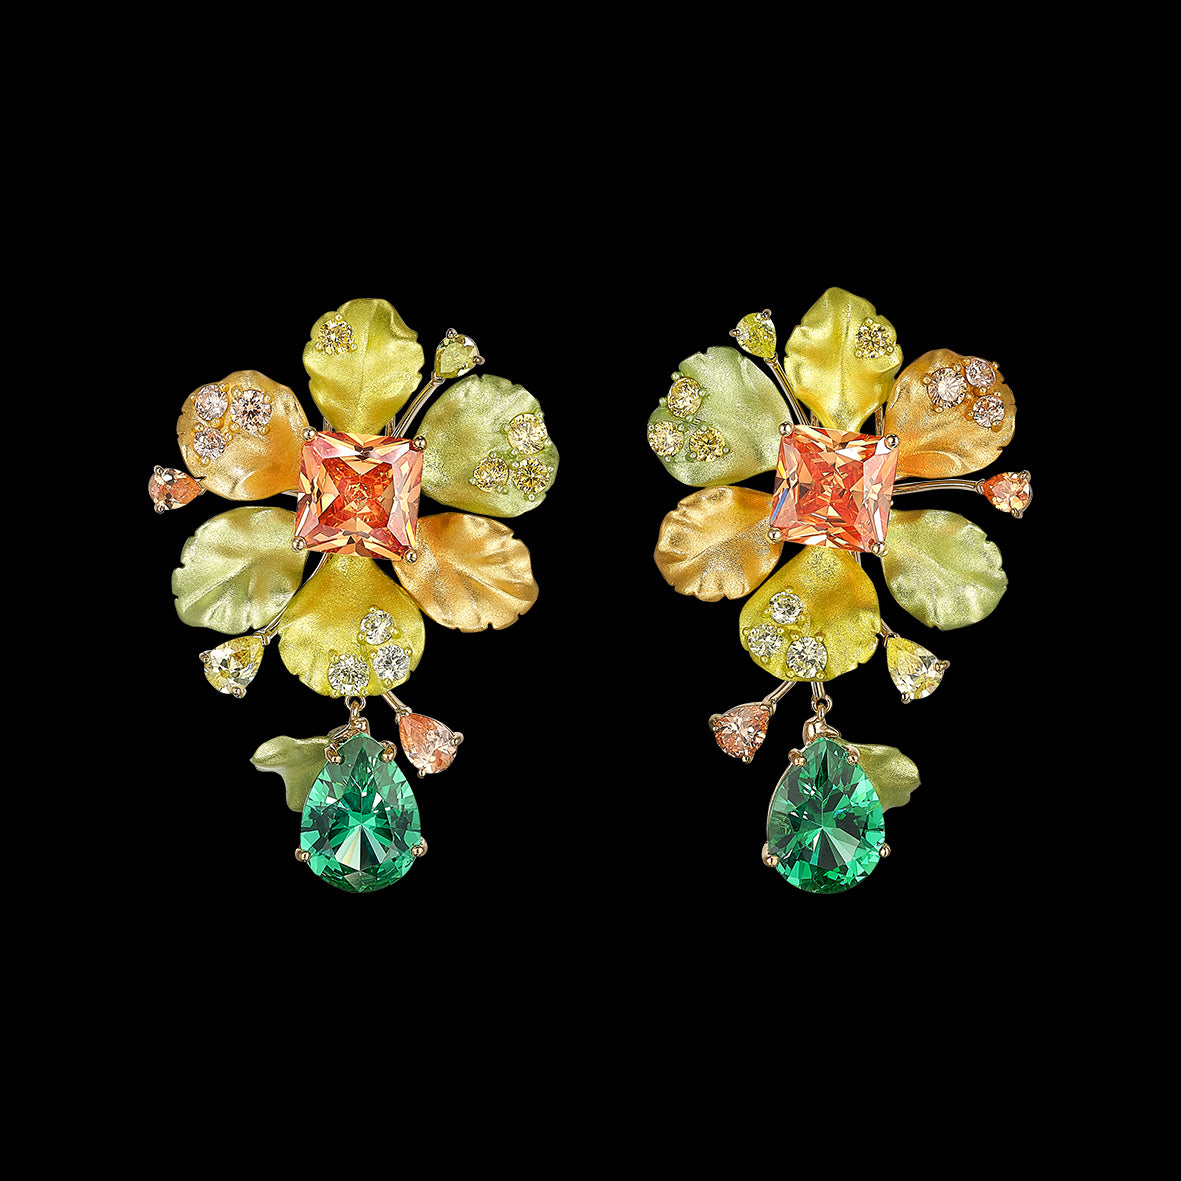 Citrus Neptuna Earrings, Earring, Anabela Chan Joaillerie - Fine jewelry with laboratory grown and created gemstones hand-crafted in the United Kingdom. Anabela Chan Joaillerie is the first fine jewellery brand in the world to champion laboratory-grown and created gemstones with high jewellery design, artisanal craftsmanship and a focus on ethical and sustainable innovations.